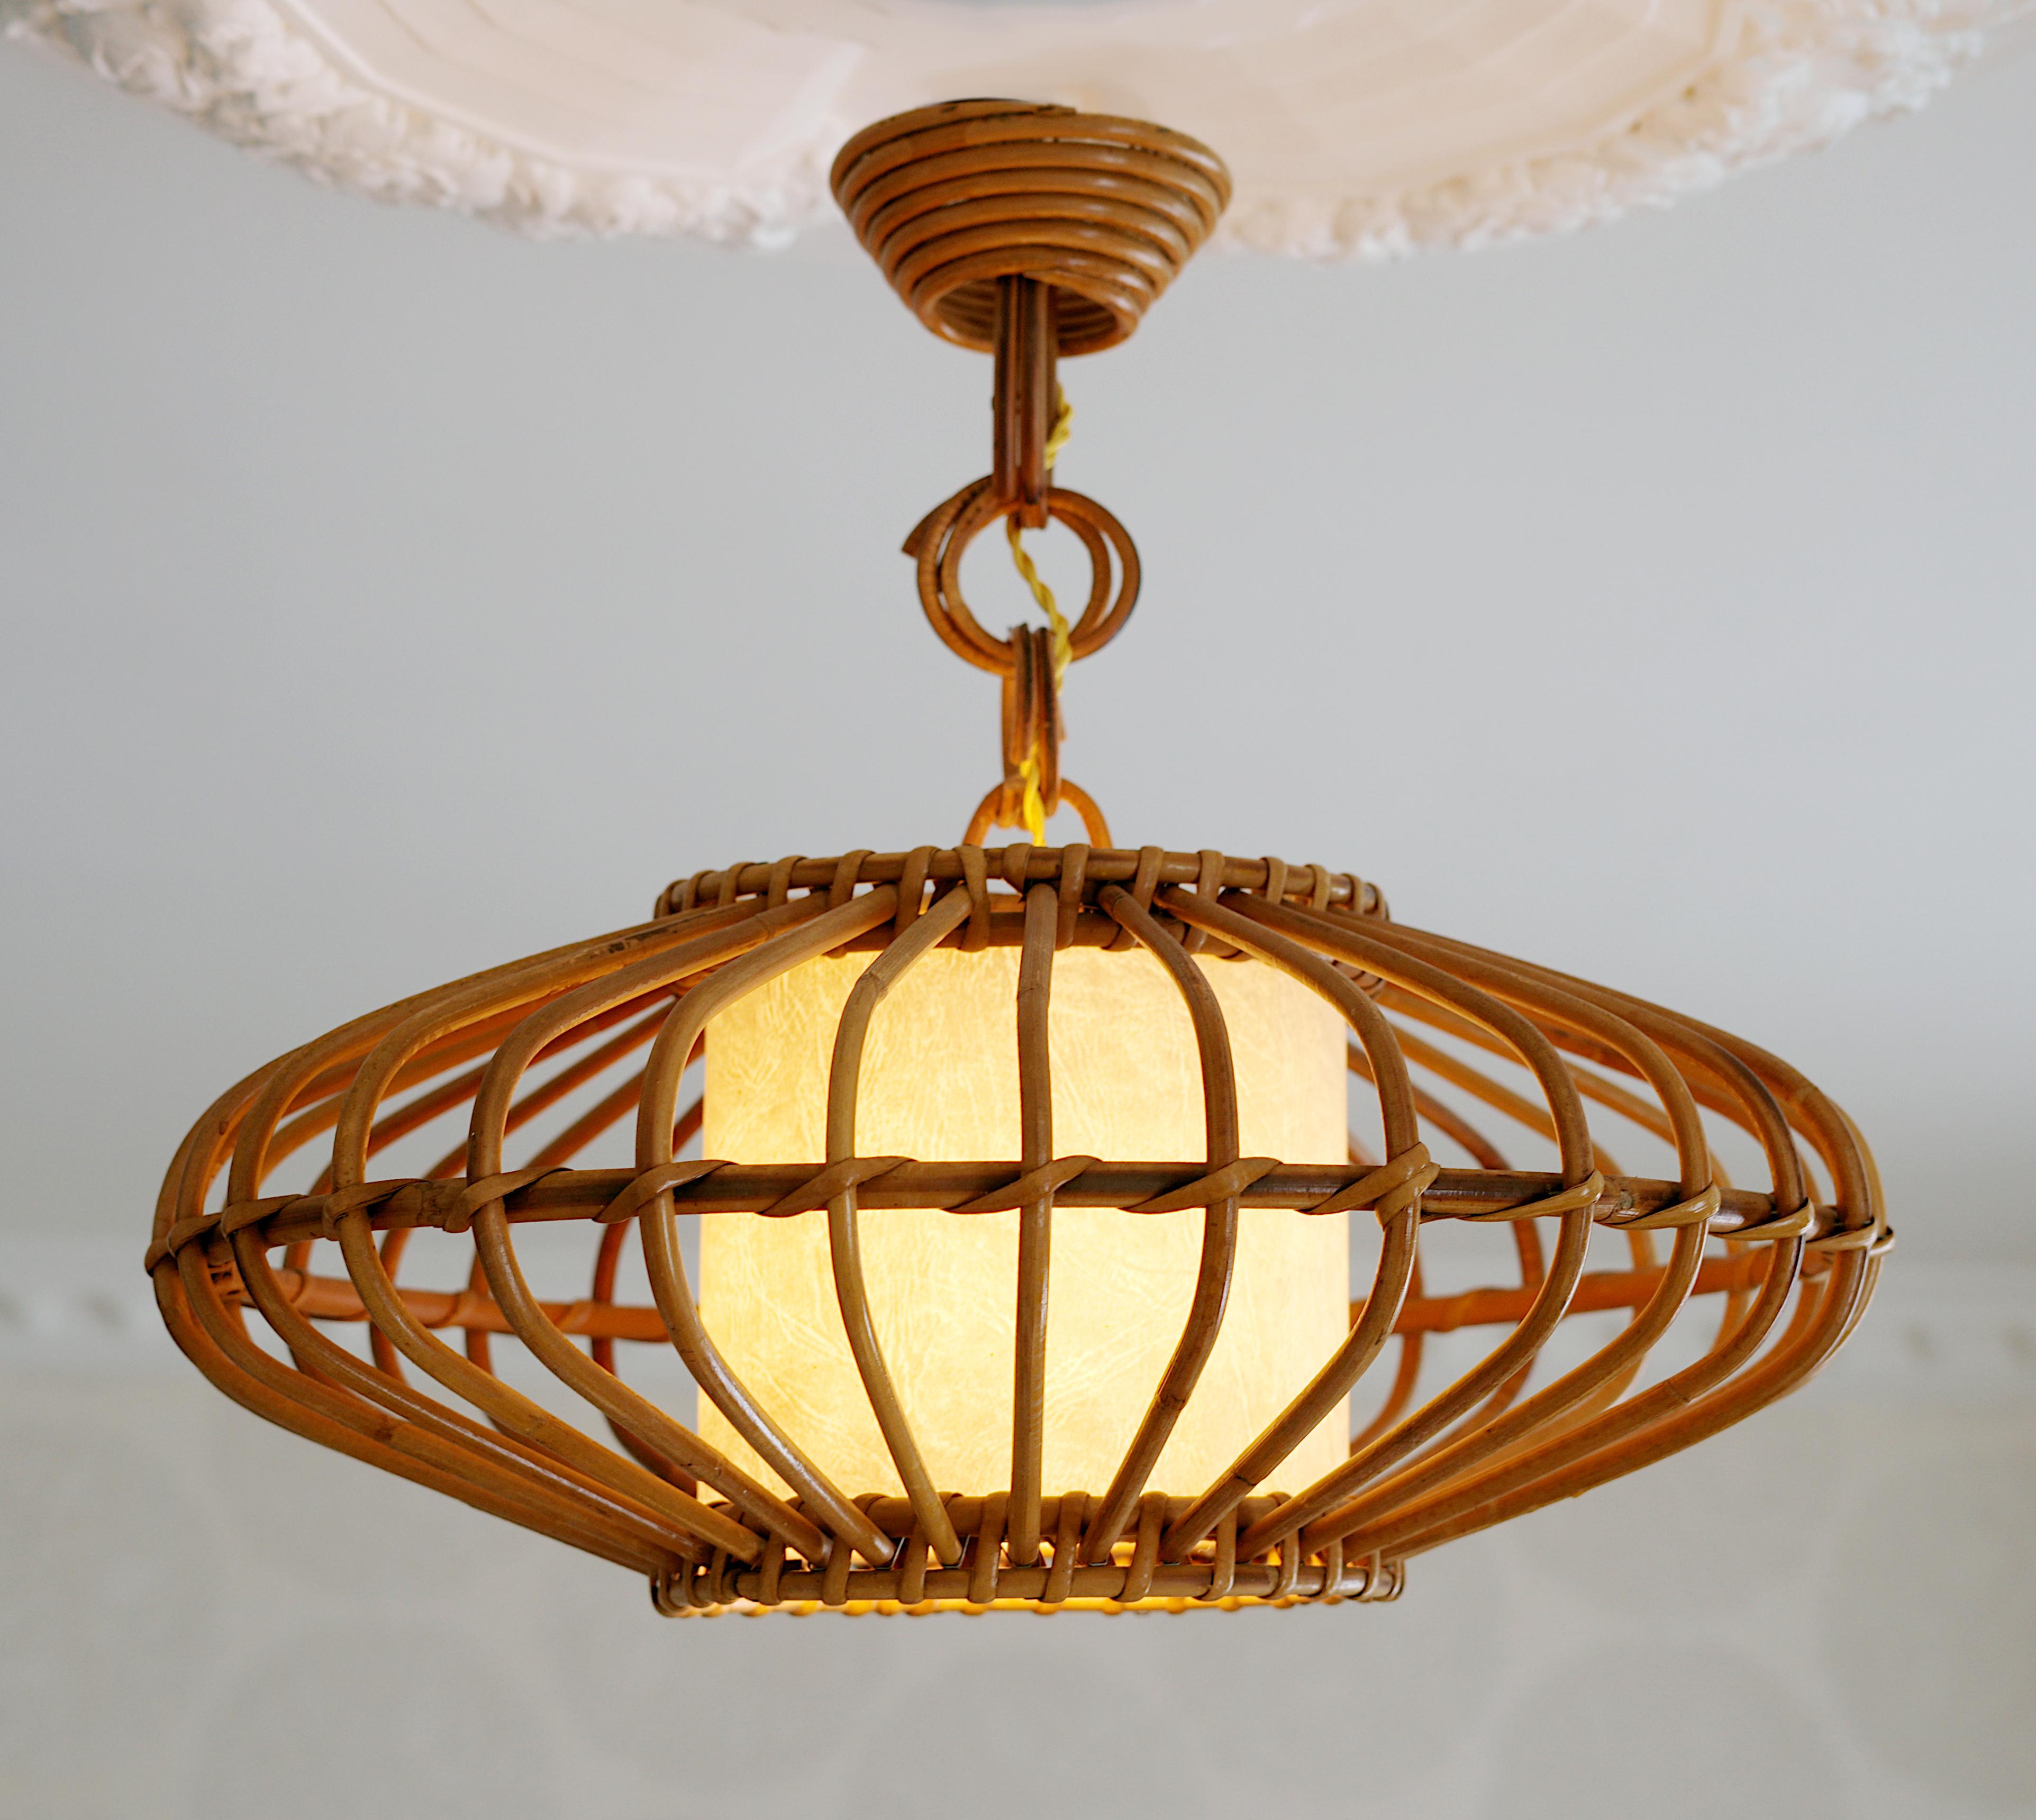 Louis SOGNOT Bamboo Pendant Lantern Chandelier, 1950s For Sale 2